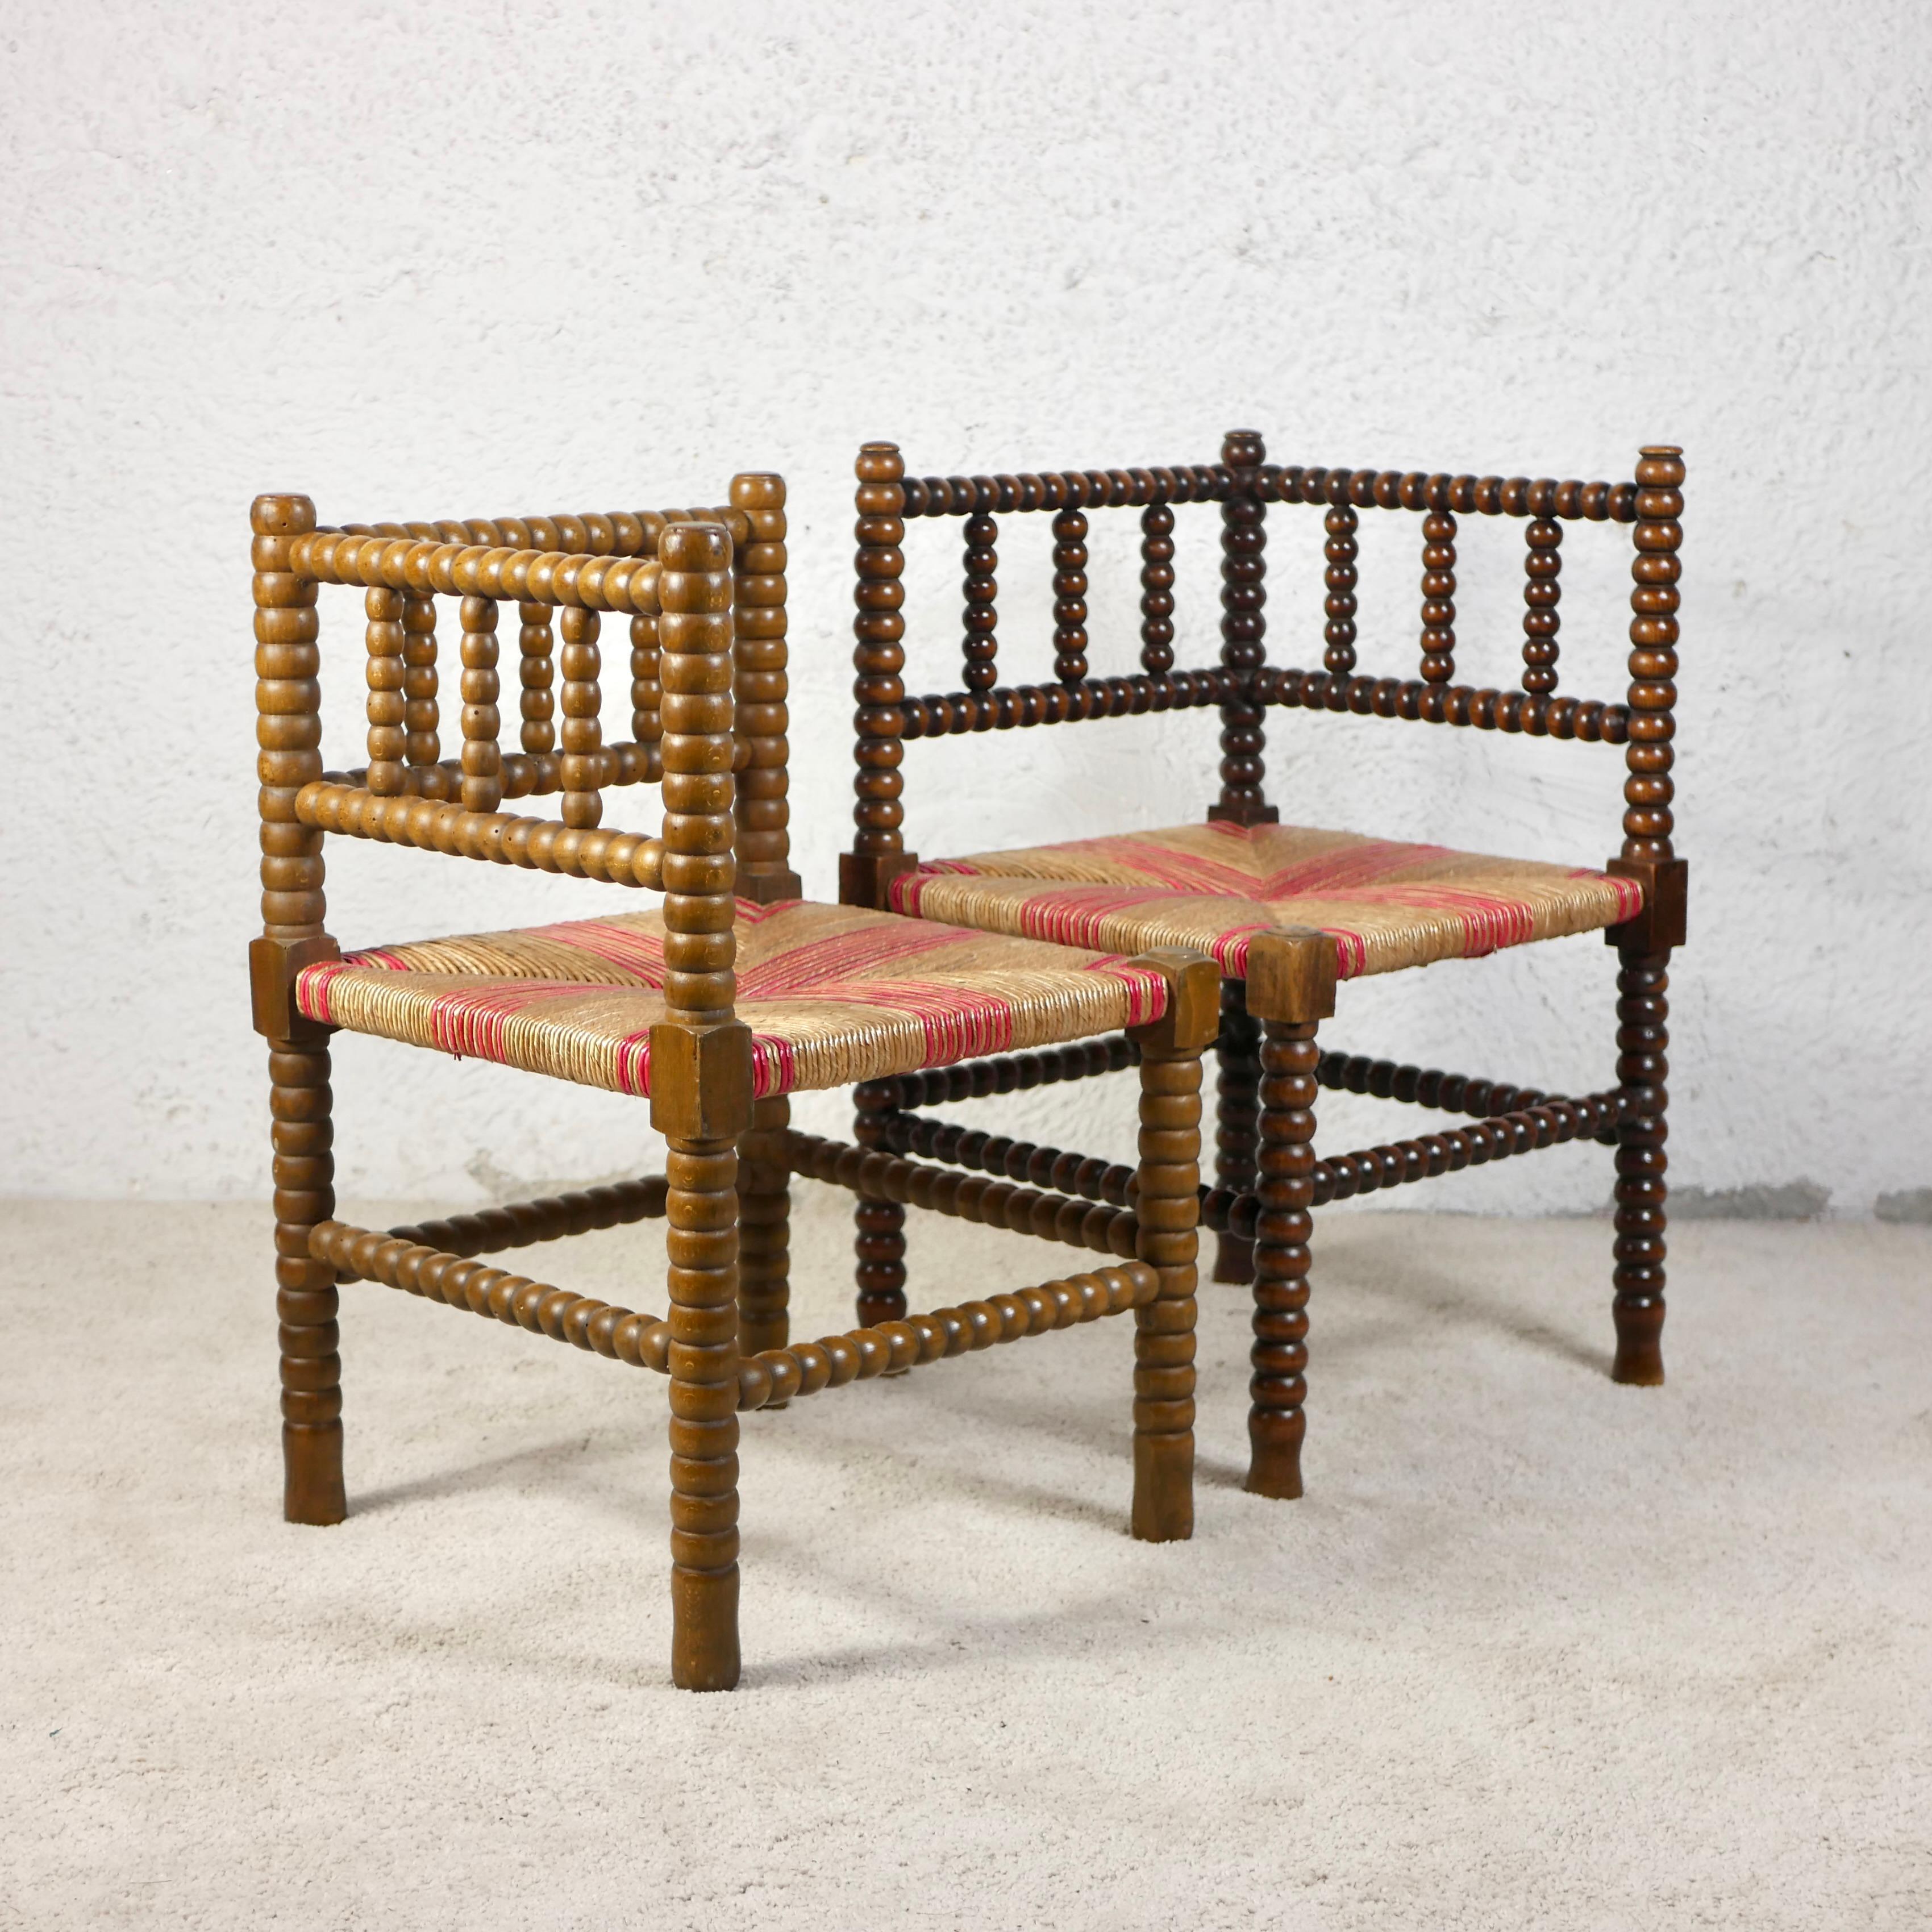 Nice pair of two corner chairs, also called Bobbin chairs, made in France between the second half of the 19th century and the beginning of the 20th century. 
They were common pieces of furniture especially in the countryside and were used as